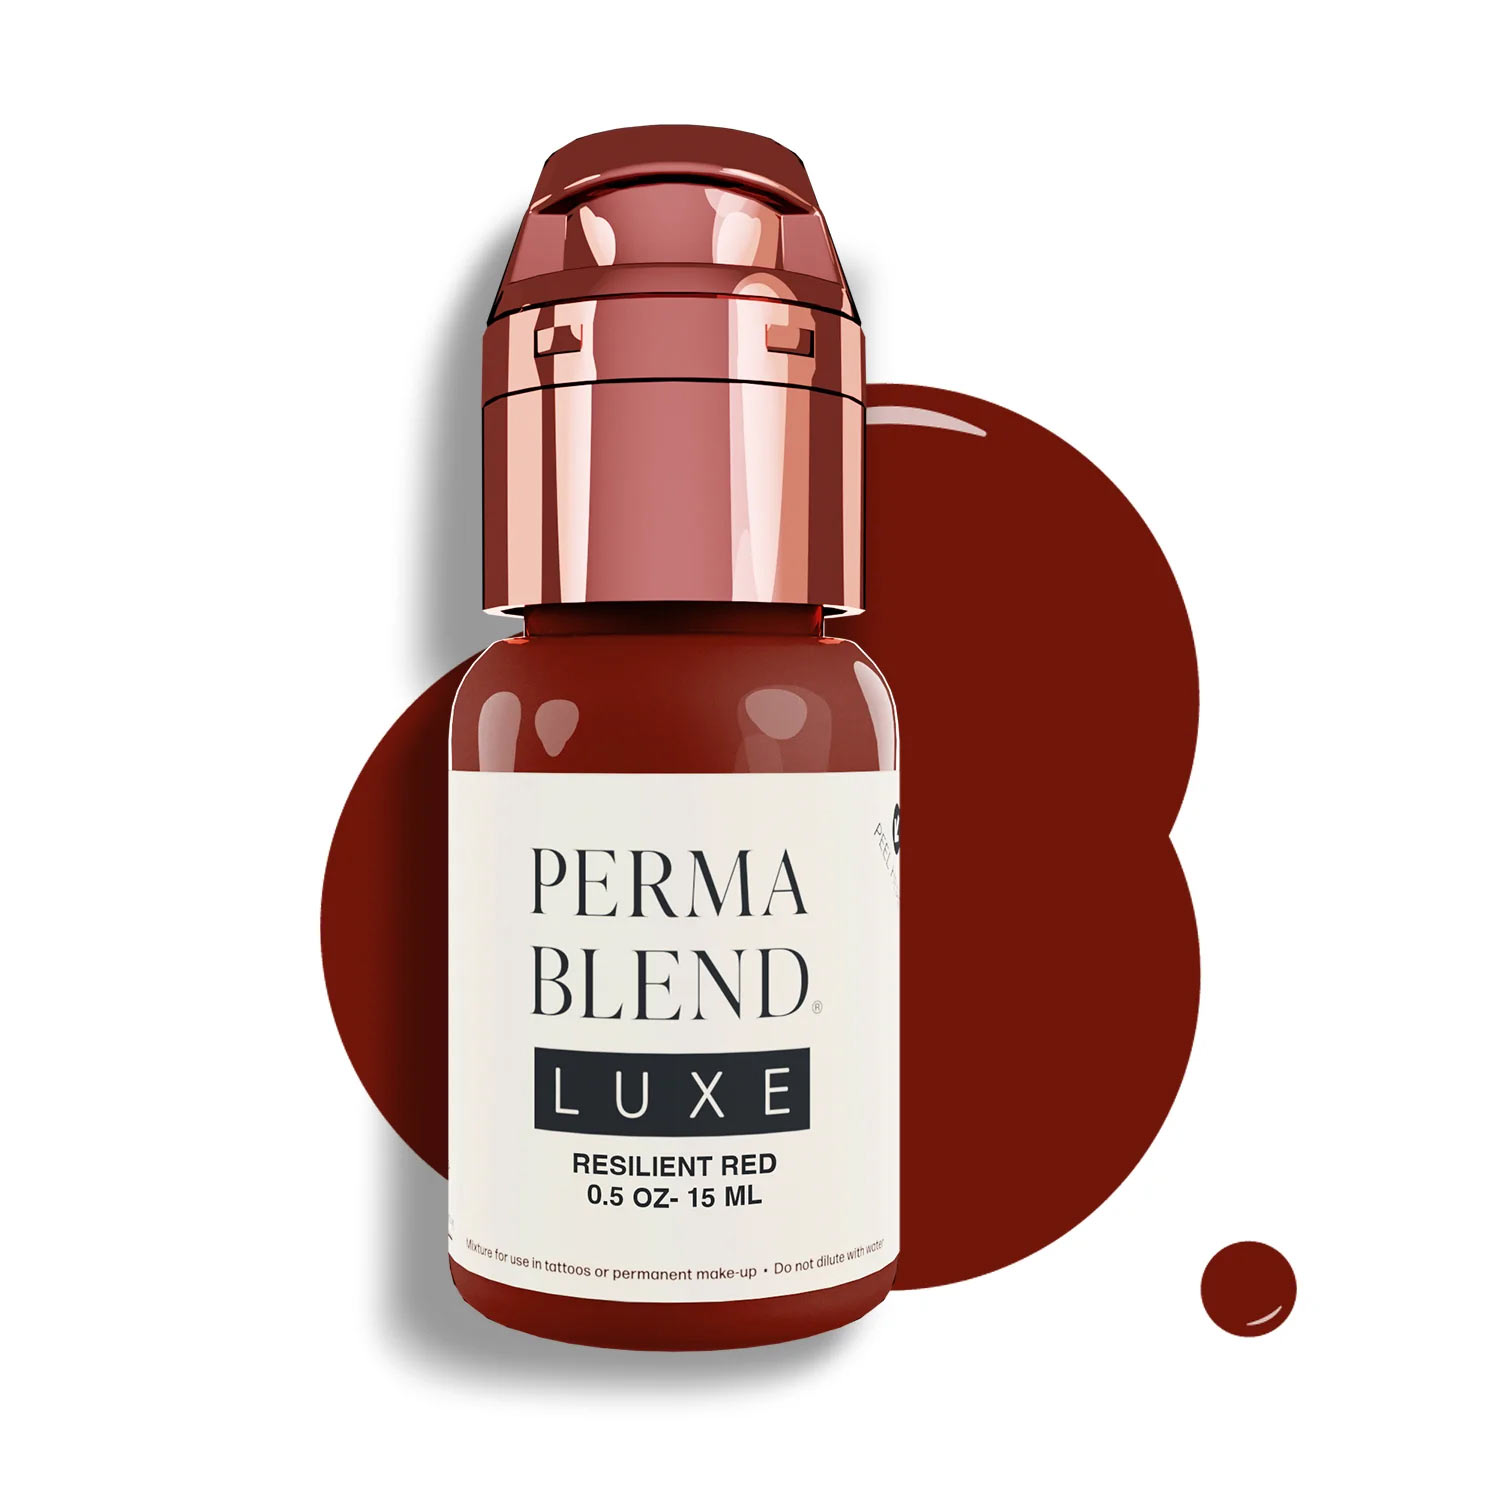 Perma Blend Luxe Vicky Martin Resilient Red 15ml